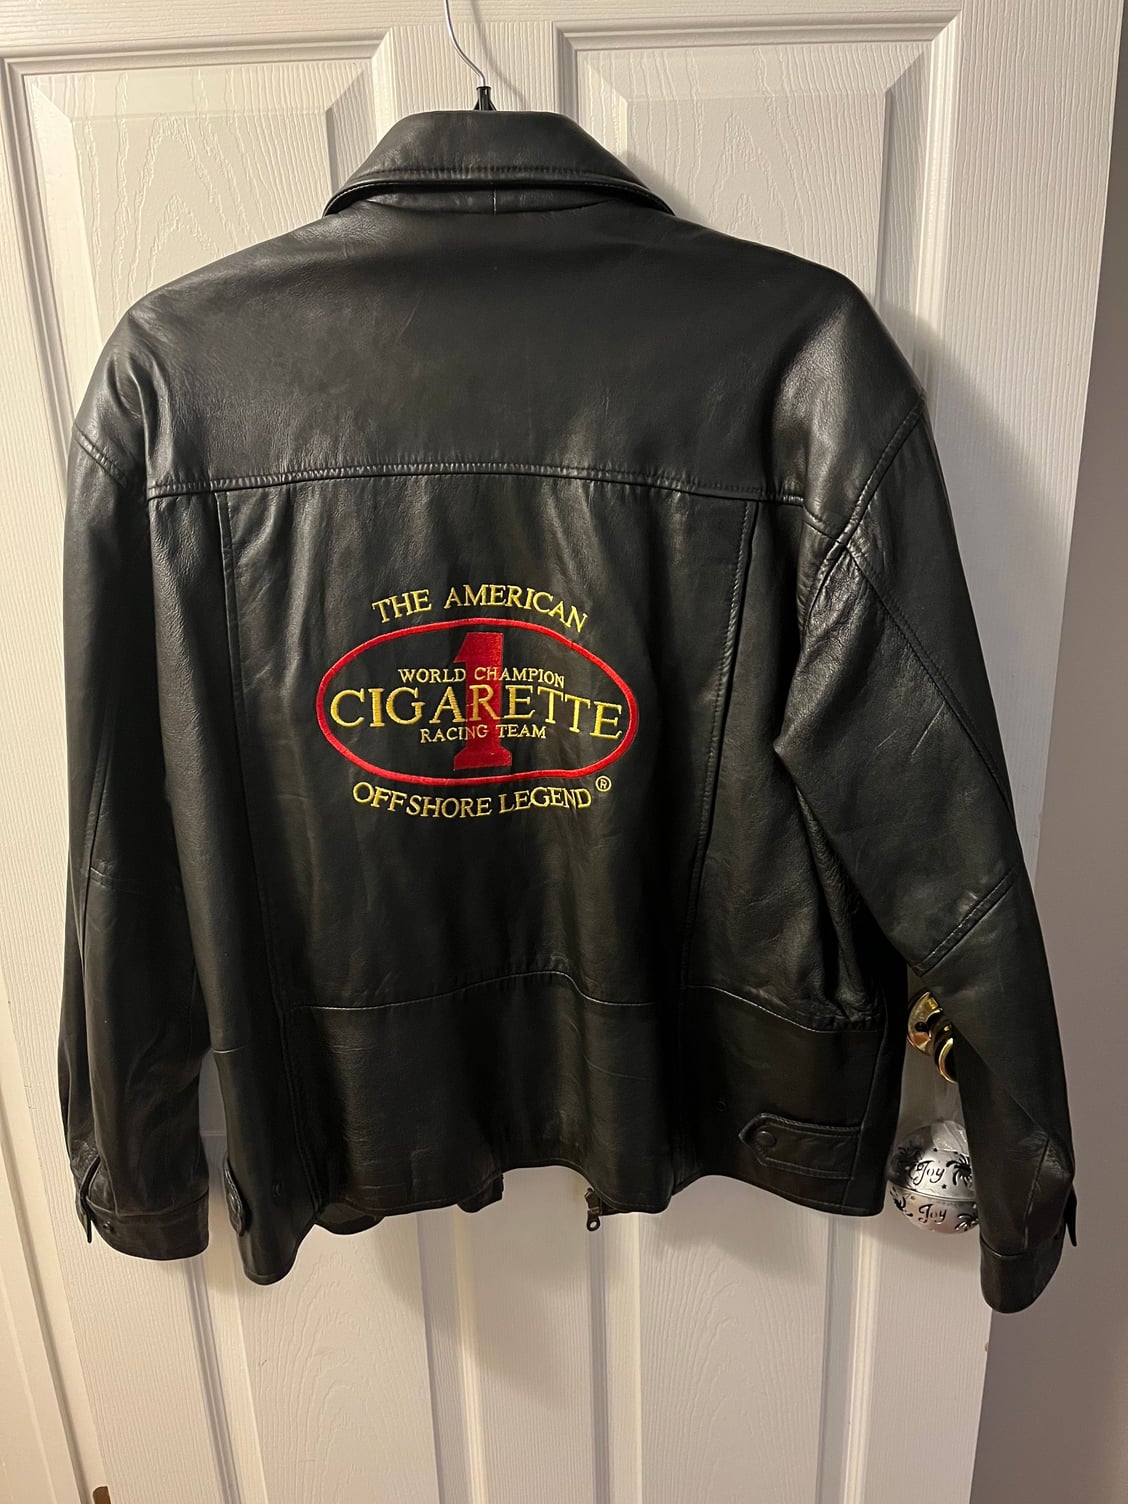 Cigarette Jackets - Offshoreonly.com